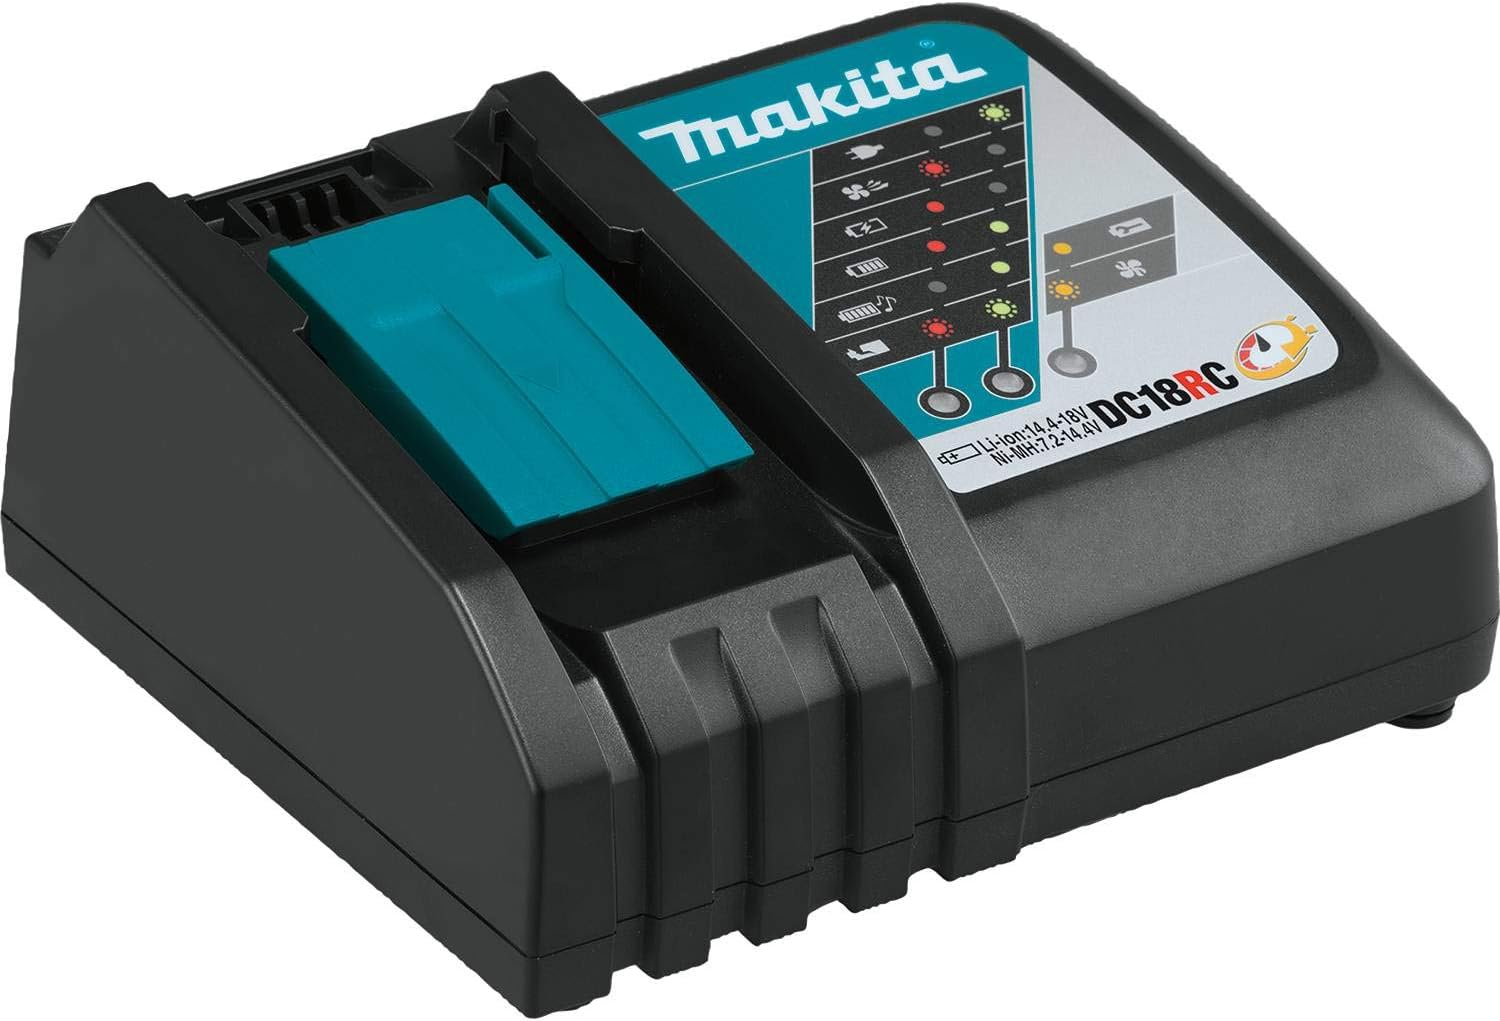 Makita BL1840BDC2 18V LXT Lithium-Ion Battery and Rapid Optimum Charger Starter Pack (4.0Ah) with XAG04Z 18V LXT Lithium-Ion Brushless Cordless 4-1/2” / 5 Cut-Off/Angle Grinder